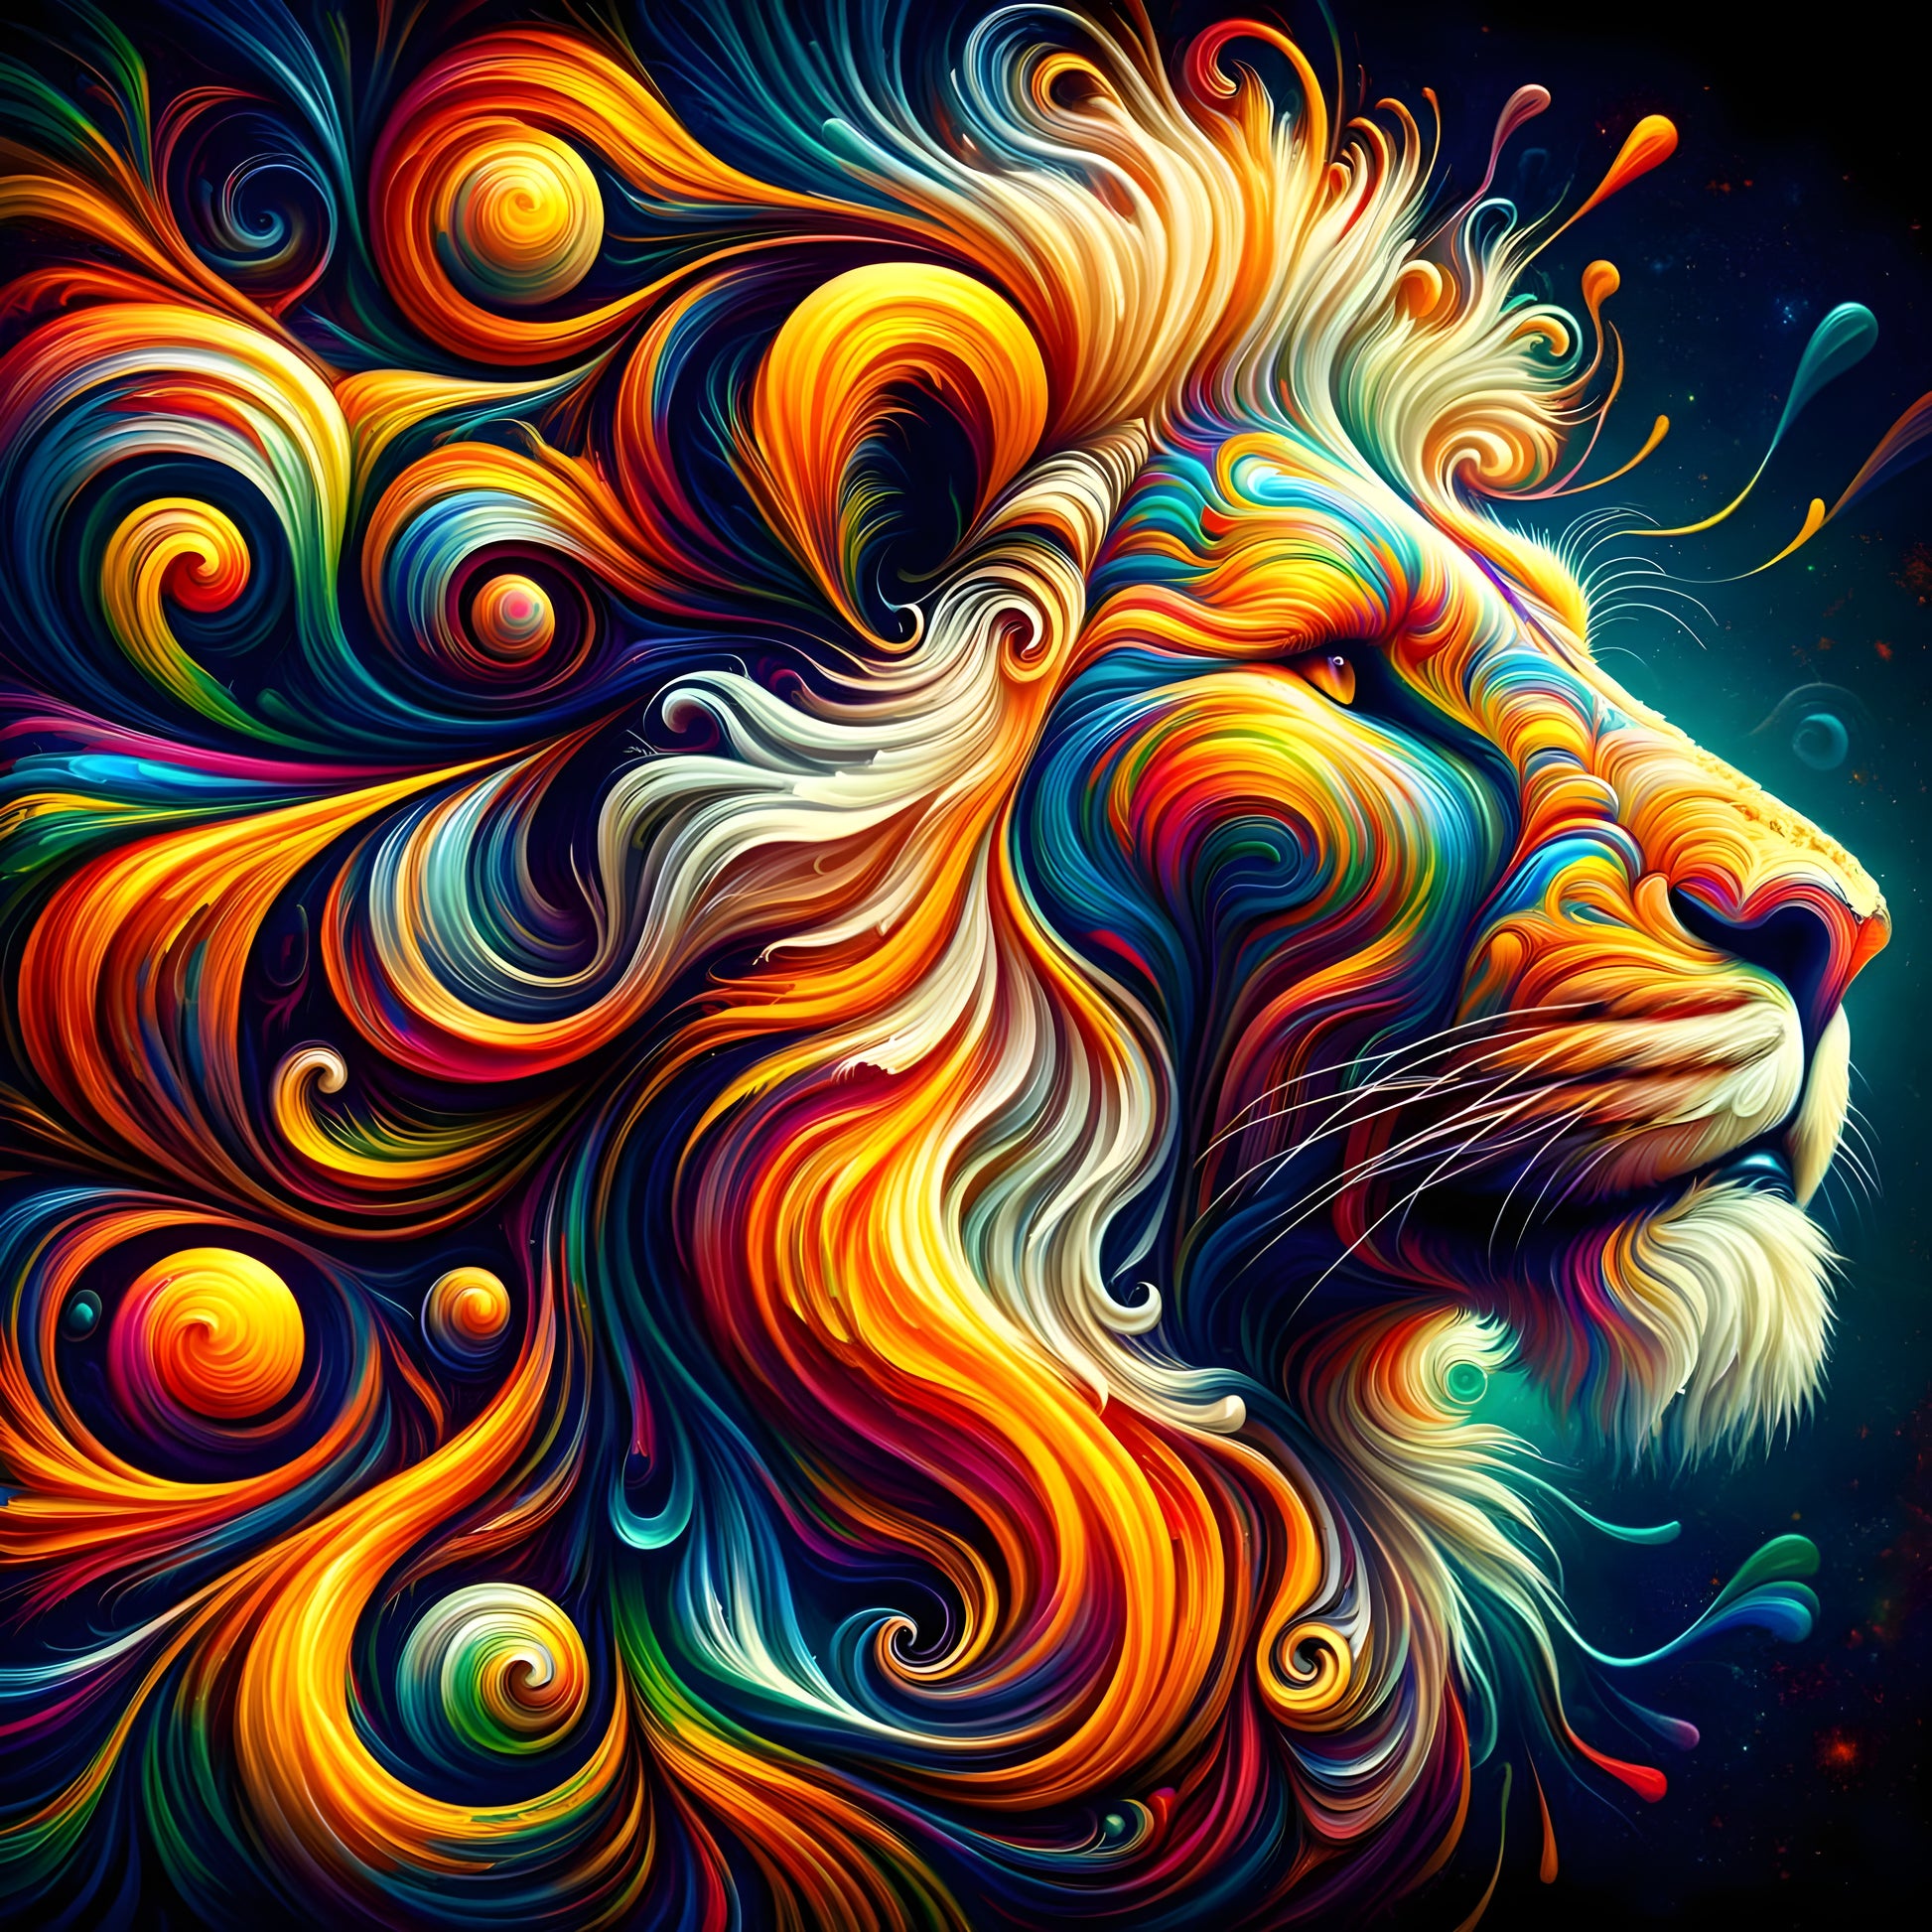 Lion With Spice - OutOfNowhereArt